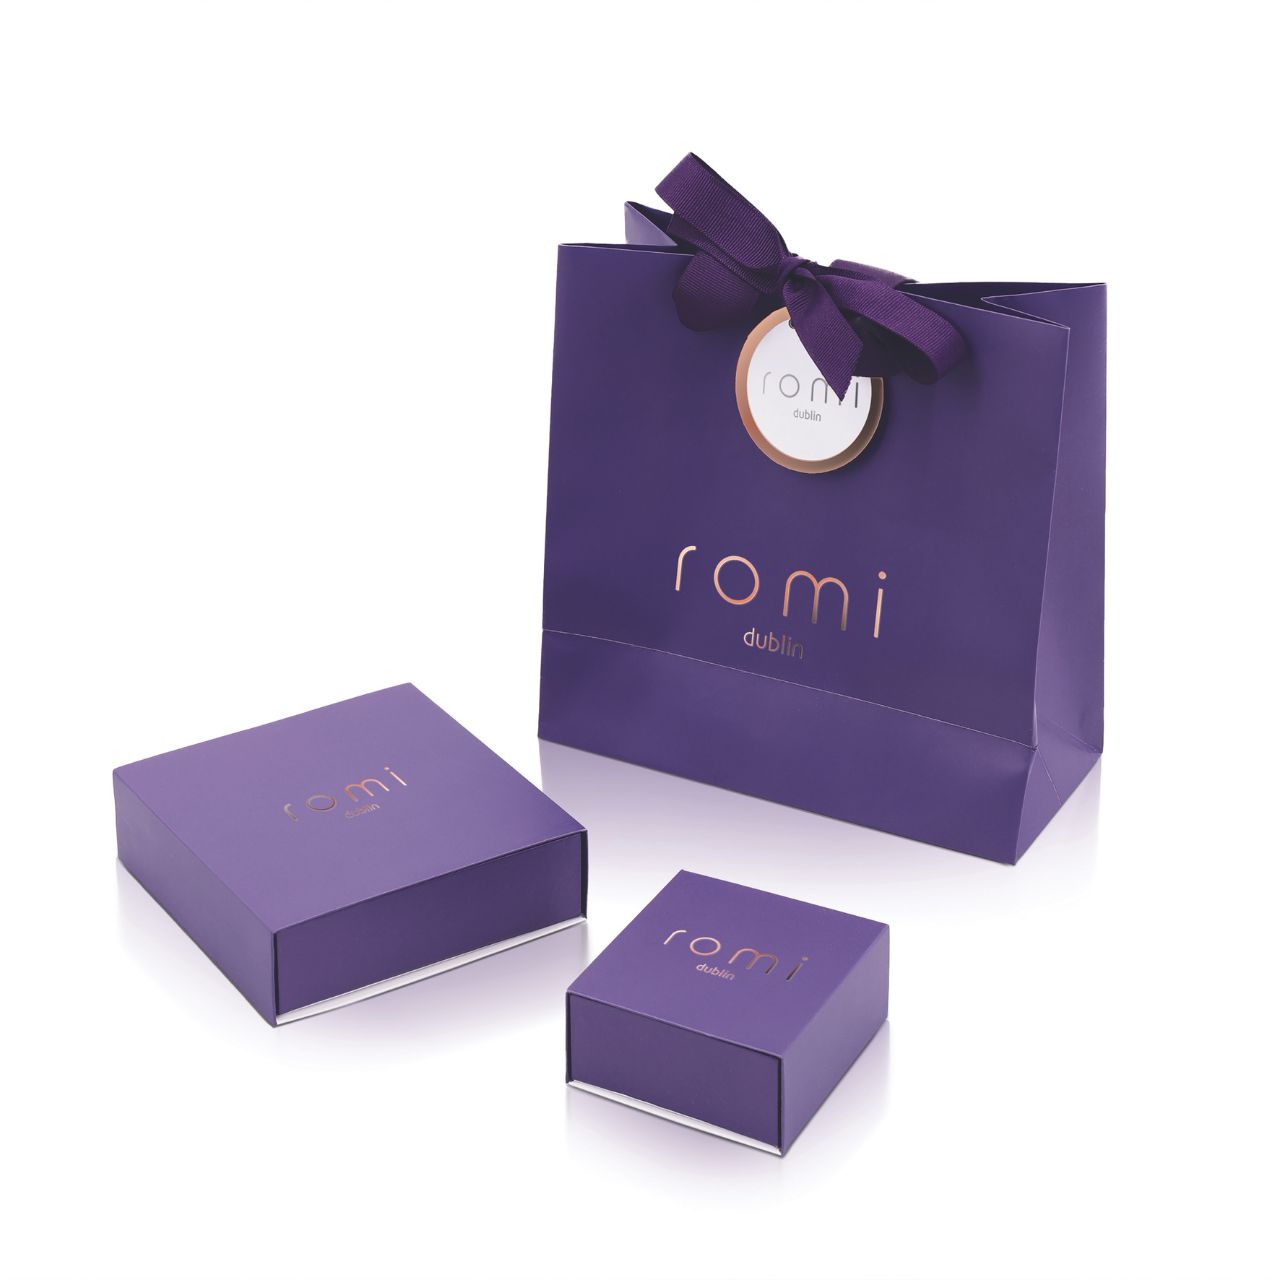 Romi Dublin Herringbone Chain Bracelet Silver  This easy-to-wear jewellery collection was inspired by daughter Romi who loves to style and accessorise. An outfit isn’t complete until the perfect pieces of jewellery and accessories have been selected to enhance it.